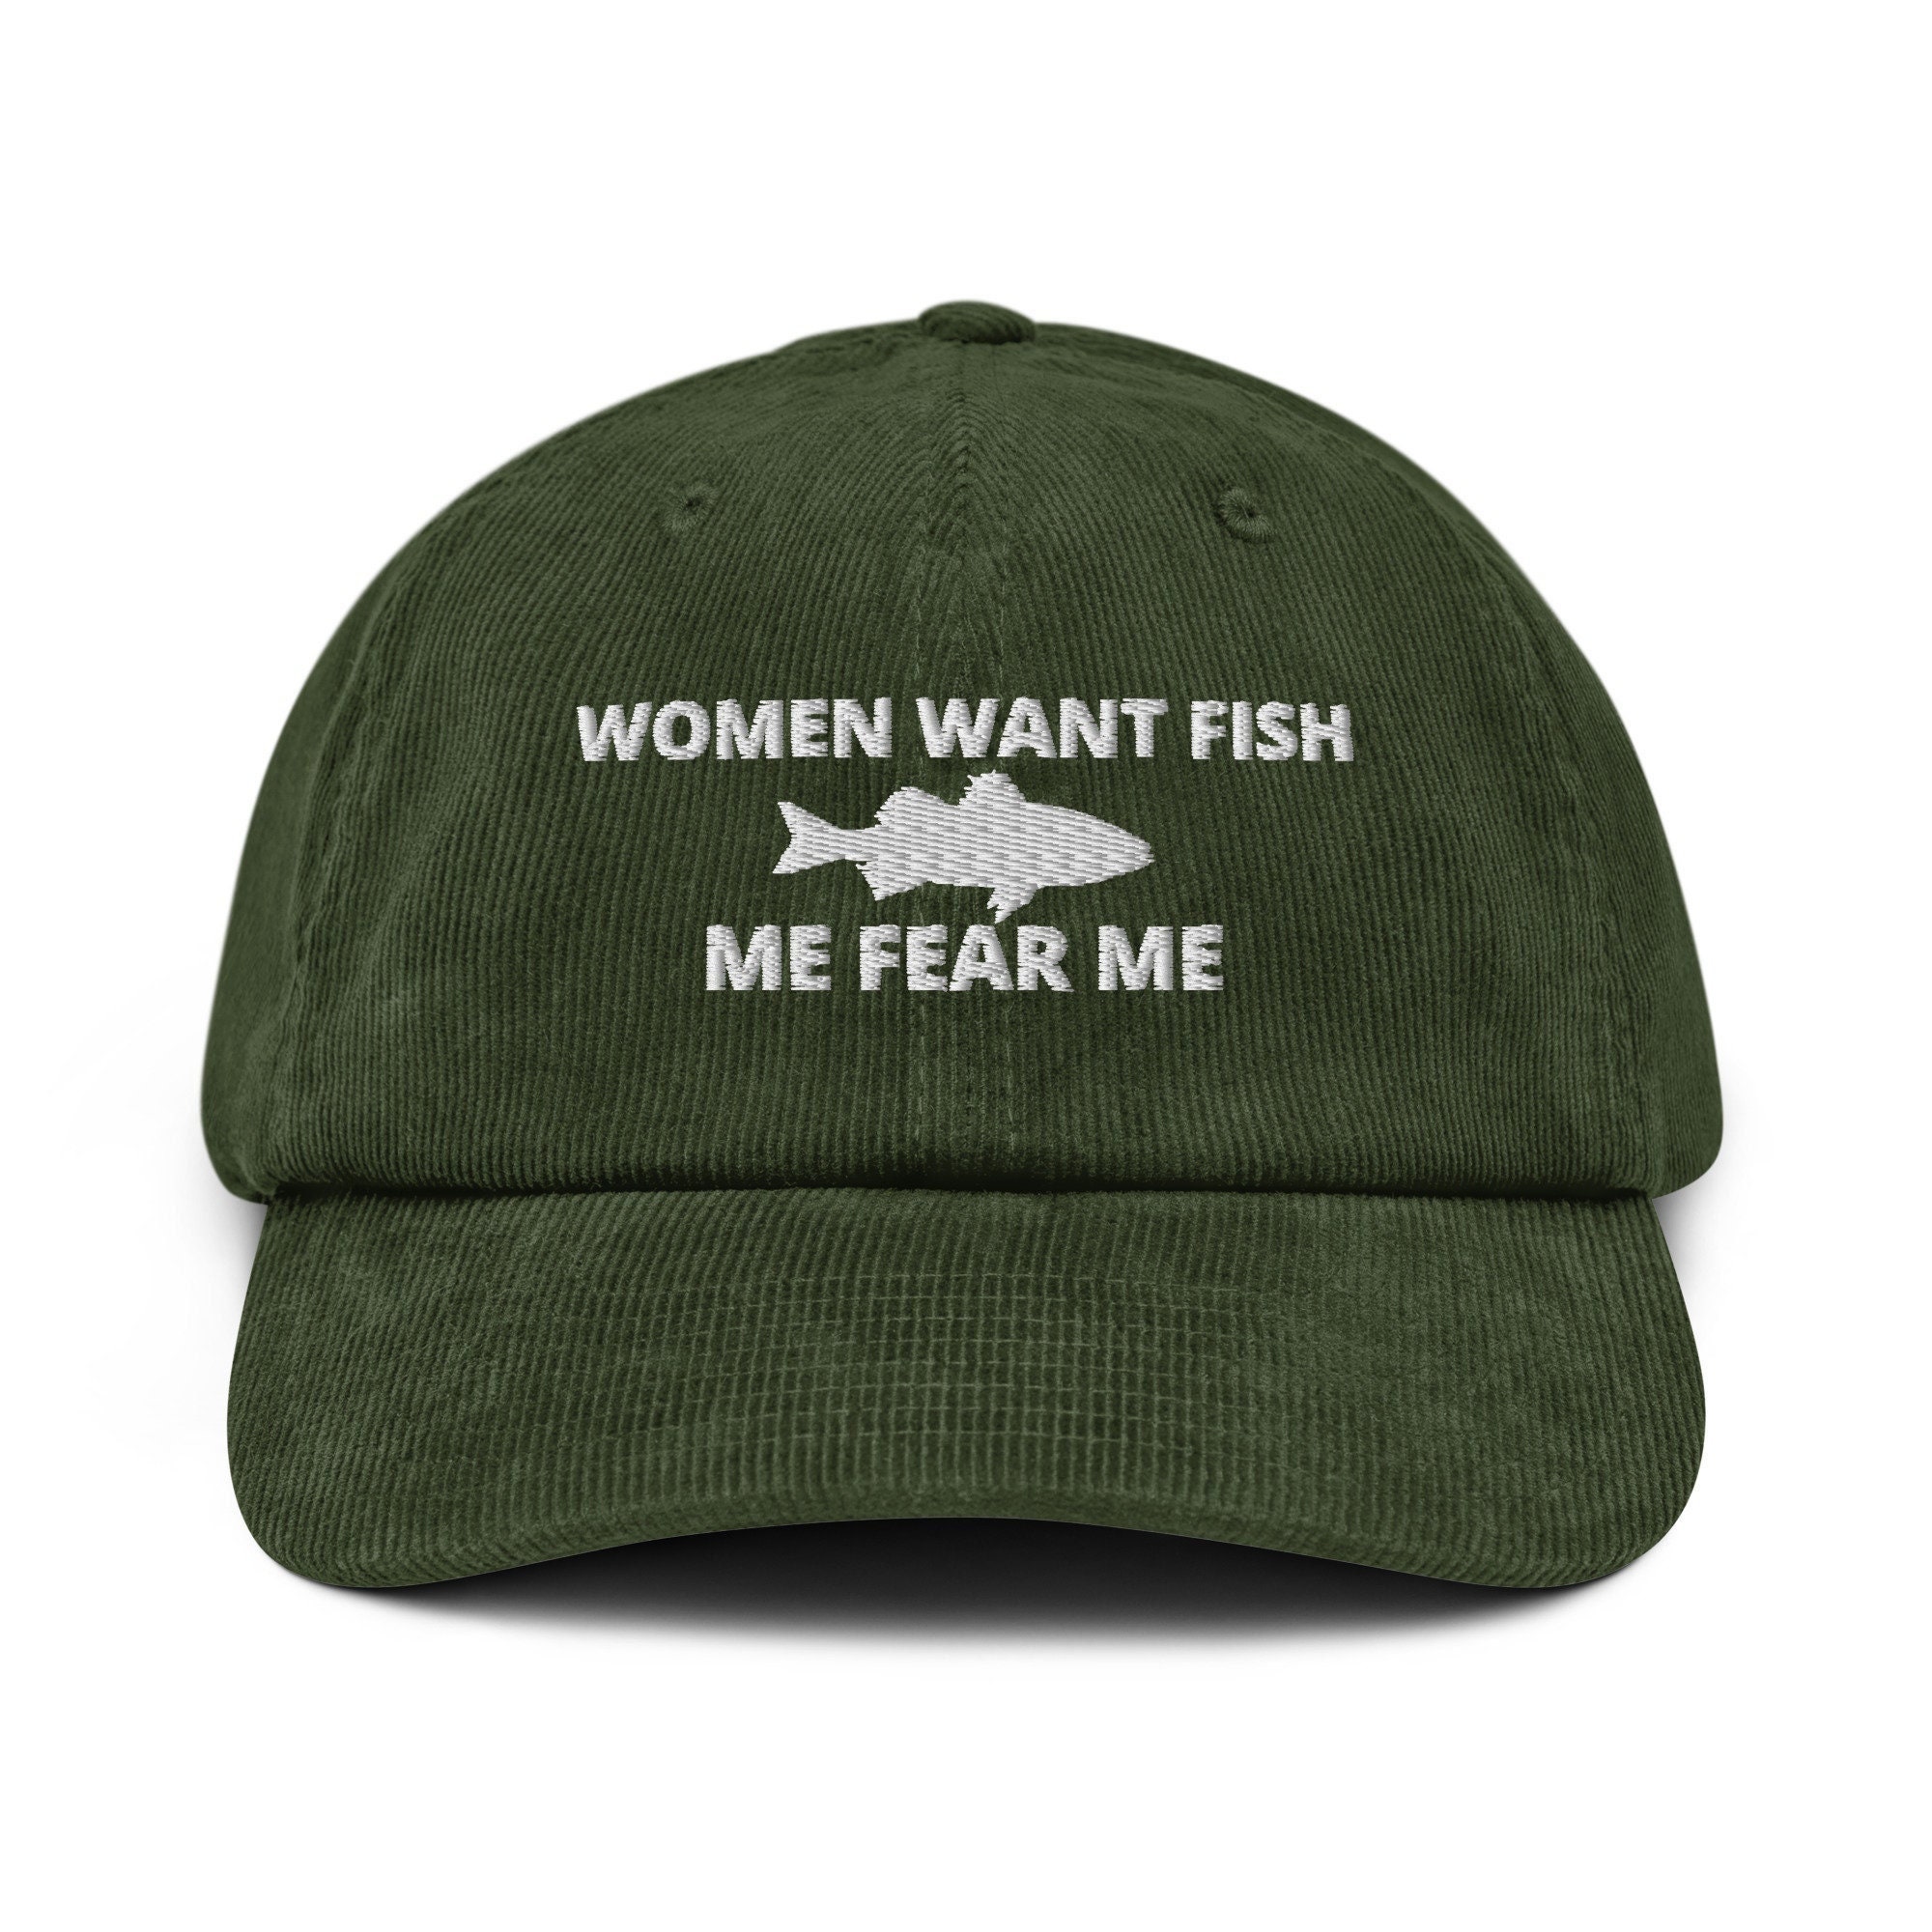 Women Want Fish, Me Fear Me, Embroidered Corduroy Hat -  UK